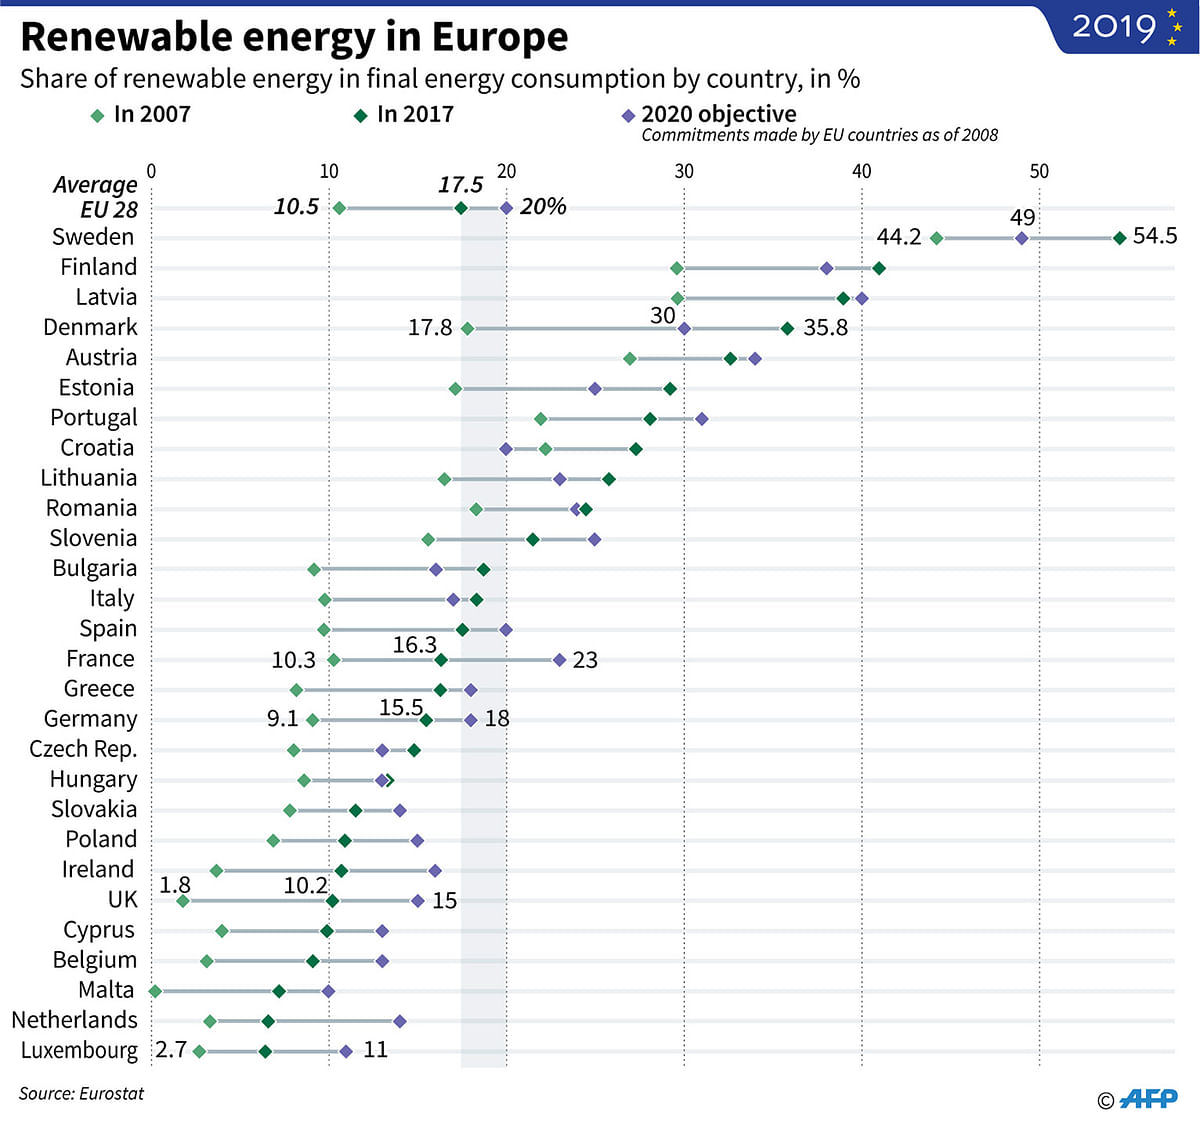 Share of renewable energy in final energy consumption per EU country compared to 2020 targets. AFP illustration